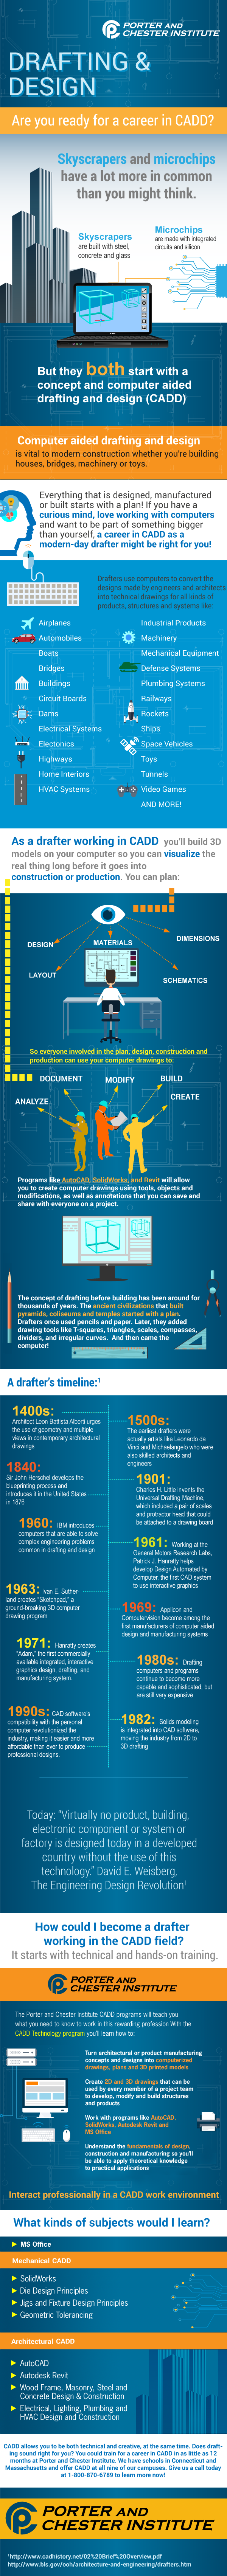 Computer Aided Drafting and Design Infographic